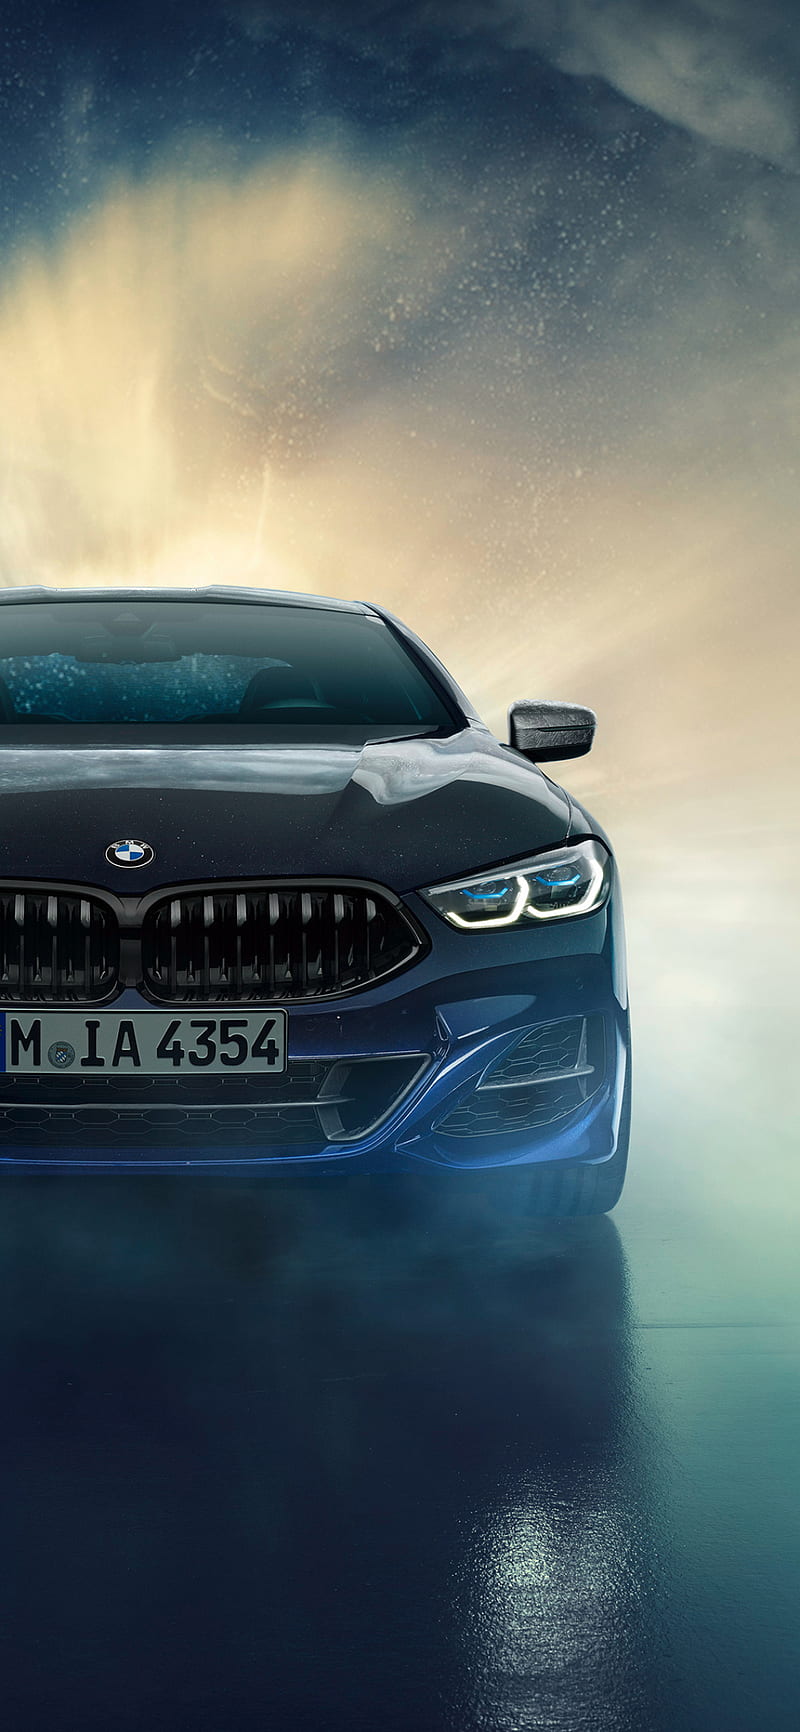 M850i Night Sky, bmw, coupe, luxury, individual, night sky, 8 series, xdrive, vehicle, special edition, HD phone wallpaper